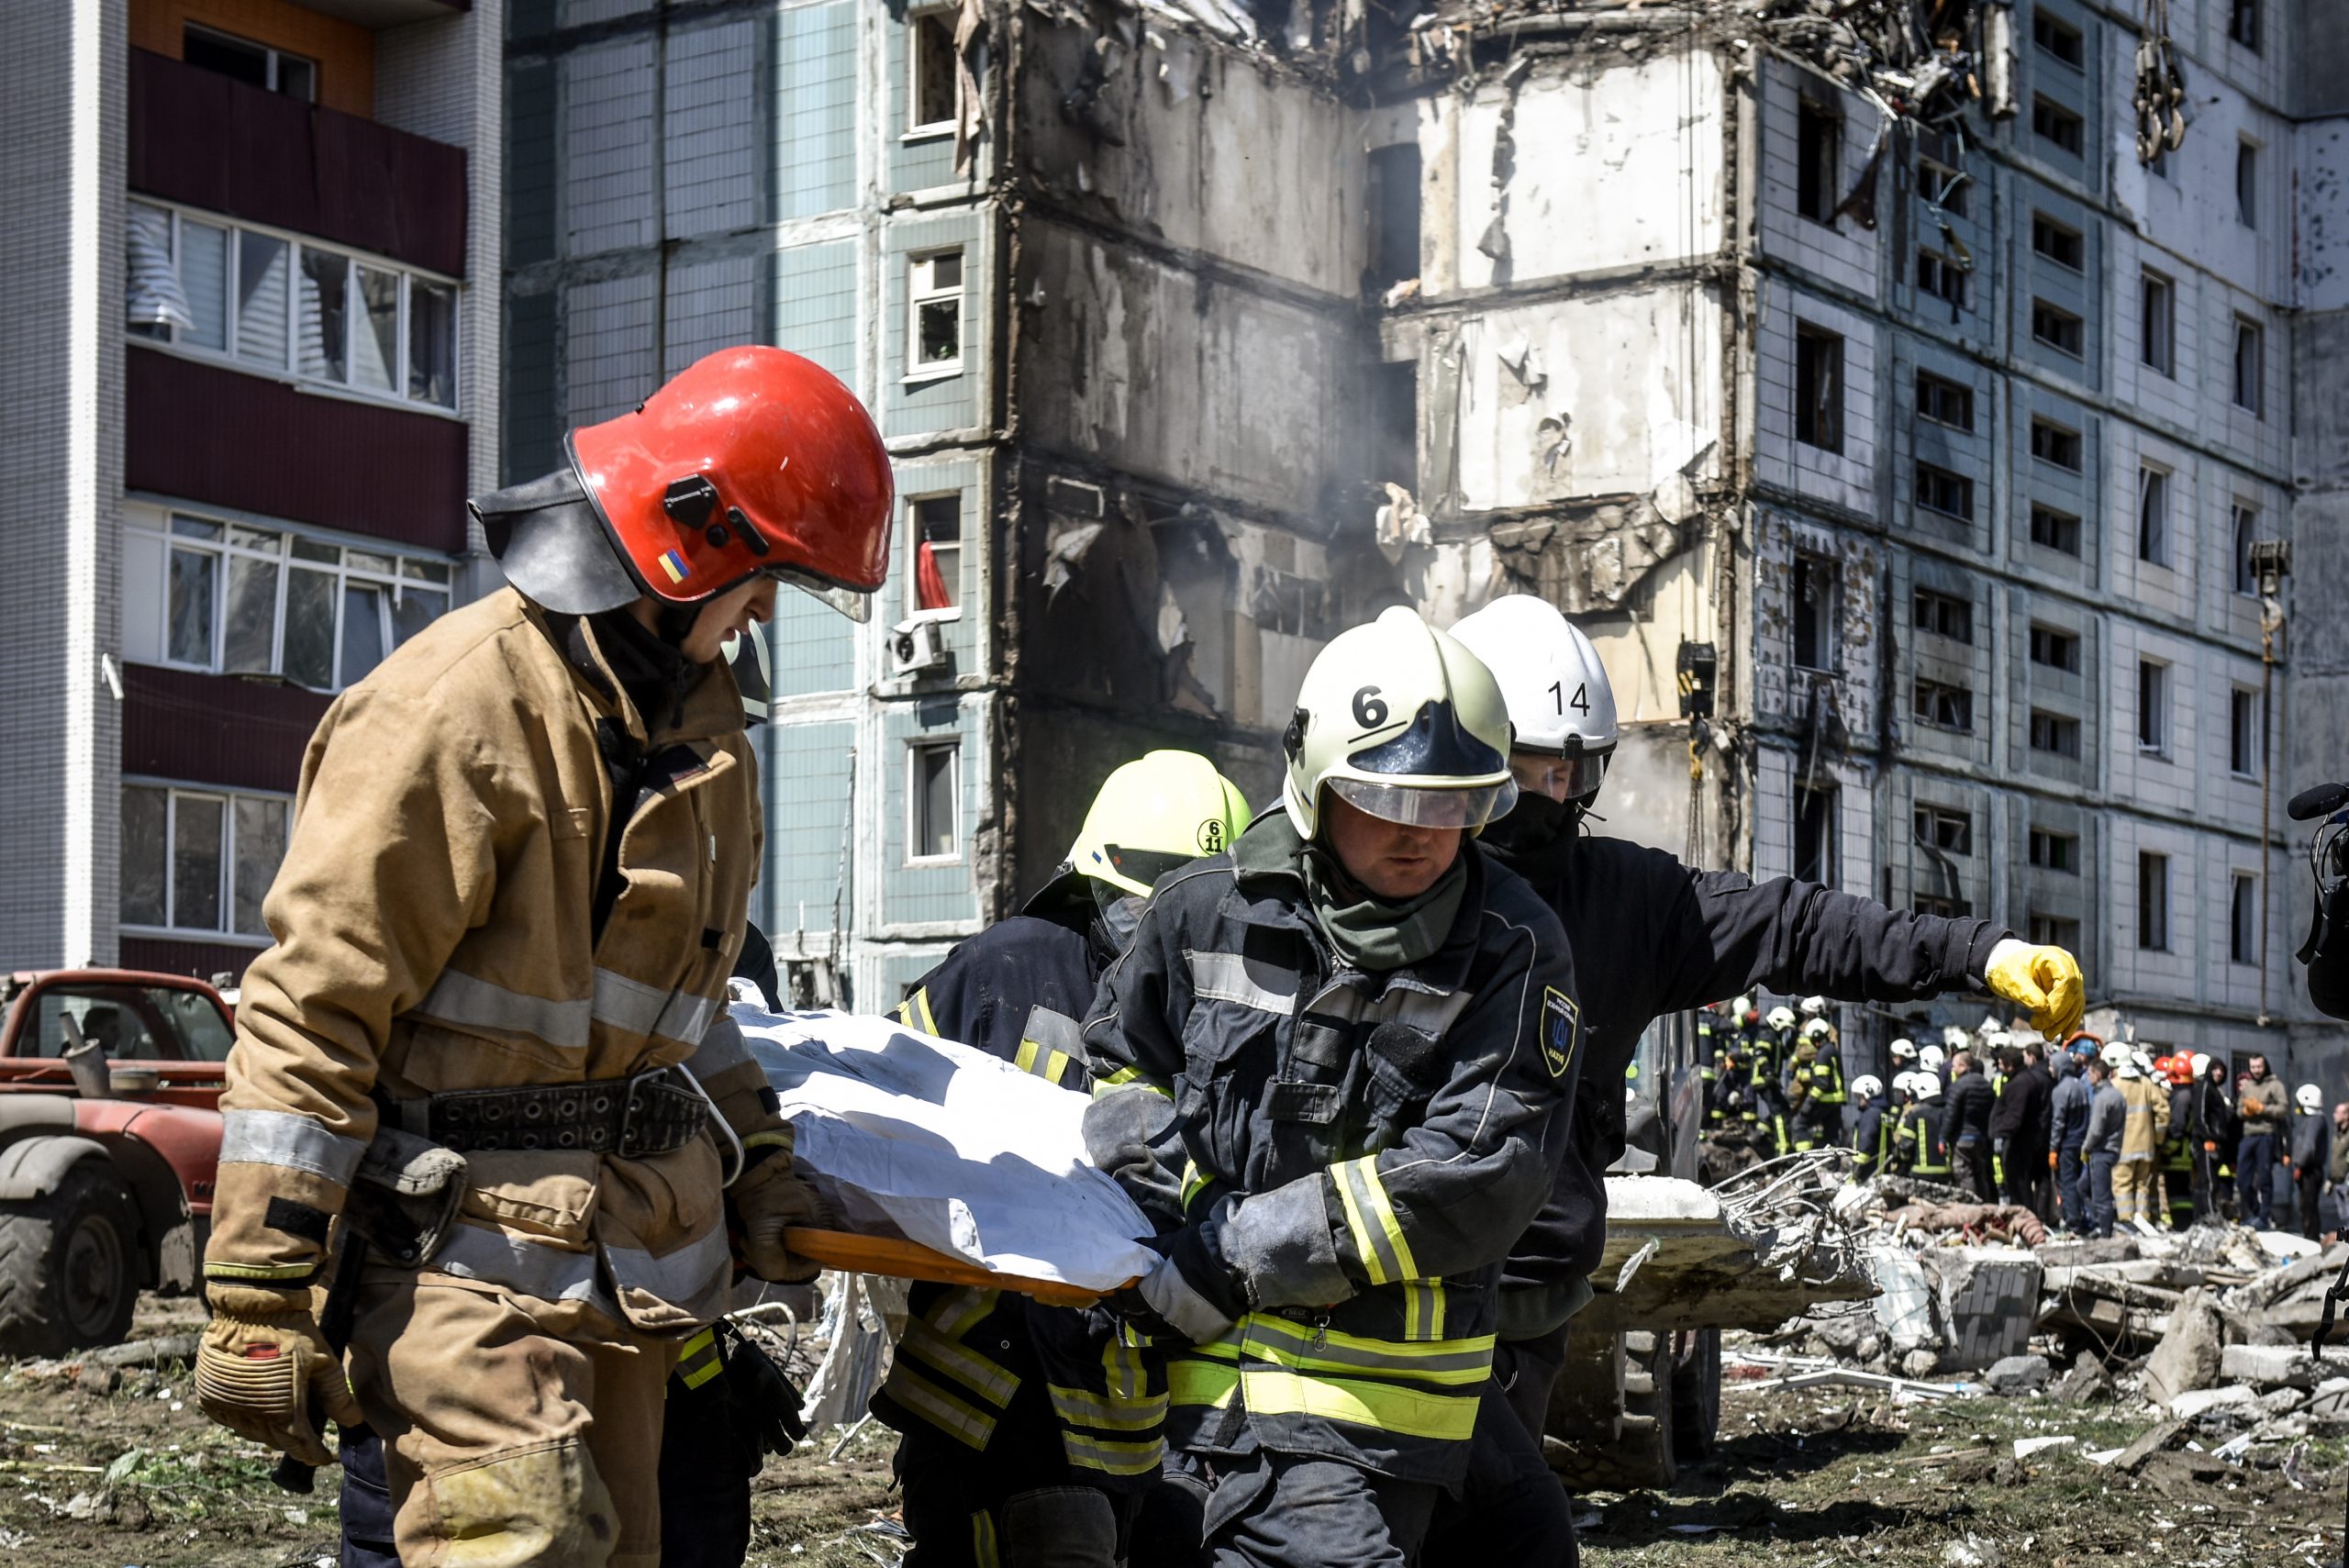 epa10596608 Rescuers carry a body recovered at the site of a damaged residential building after a missile attack, in Uman, Cherkasy region, central Ukraine, 28 April 2023. At least 17 people were killed as a result of a rocket attack in Uman, and 18 others were injured, according to the State Emergency Service of Ukraine. Ukraine's Ministry of Internal Affairs said on 28 April, that the Russian army conducted attacks on residential buildings across the country, including Dnipro, Uman and Ukrainka in the Kyiv region.  EPA/OLEG PETRASYUK